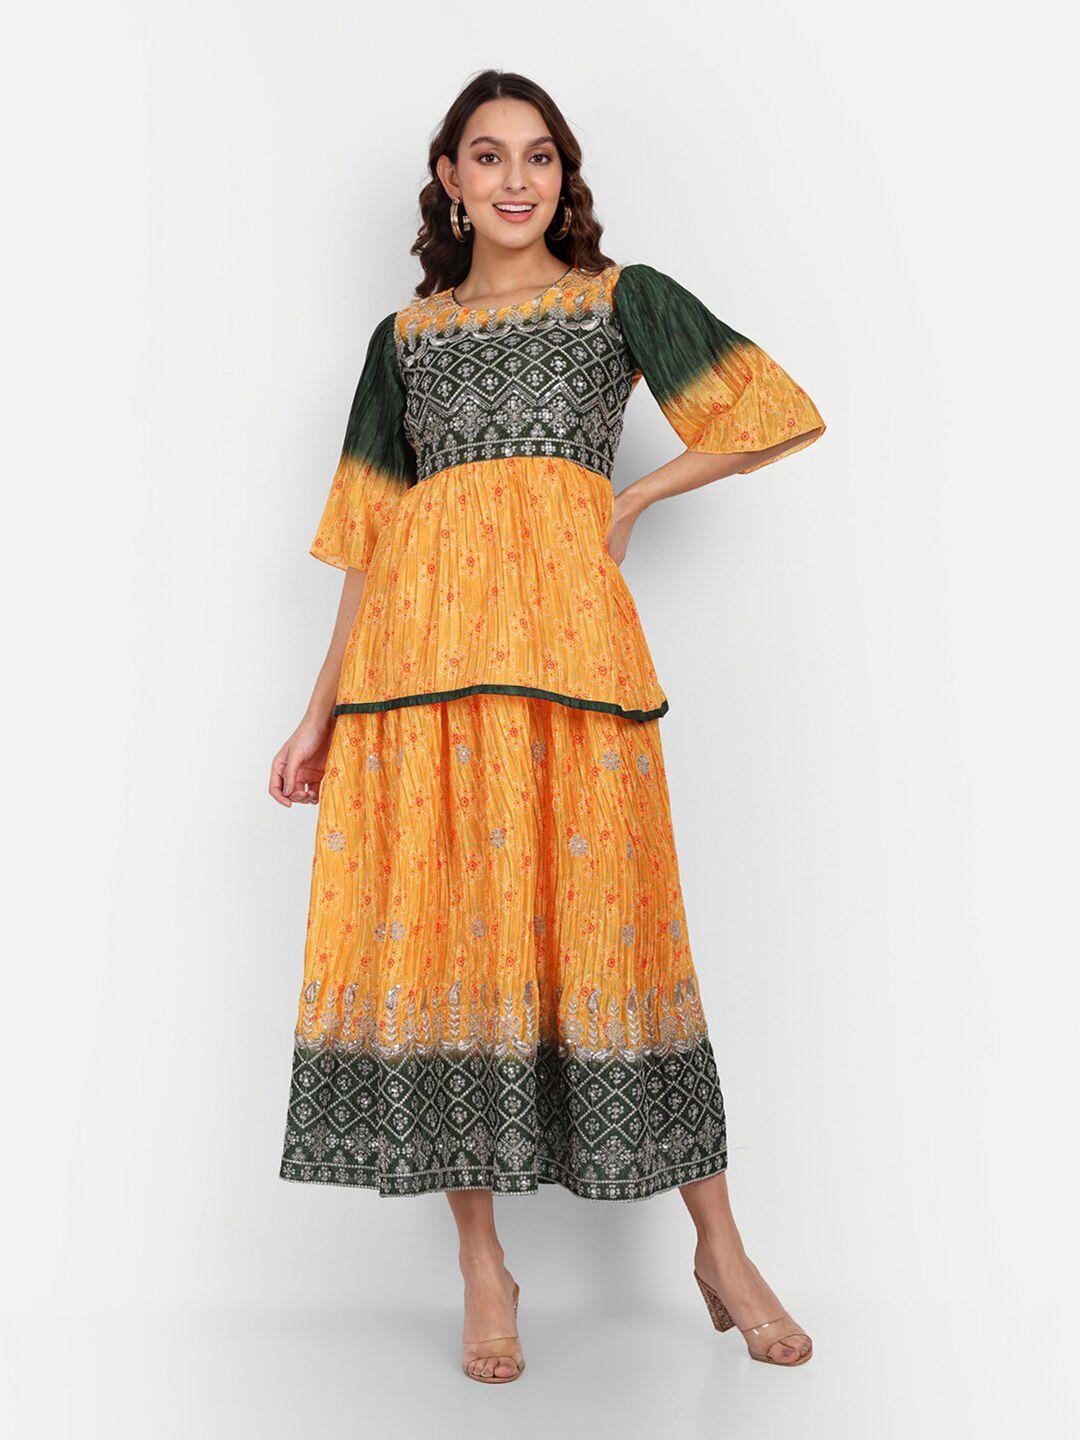 growish floral printed round neck flared sleeve fit&flare layered midi ethnic dress